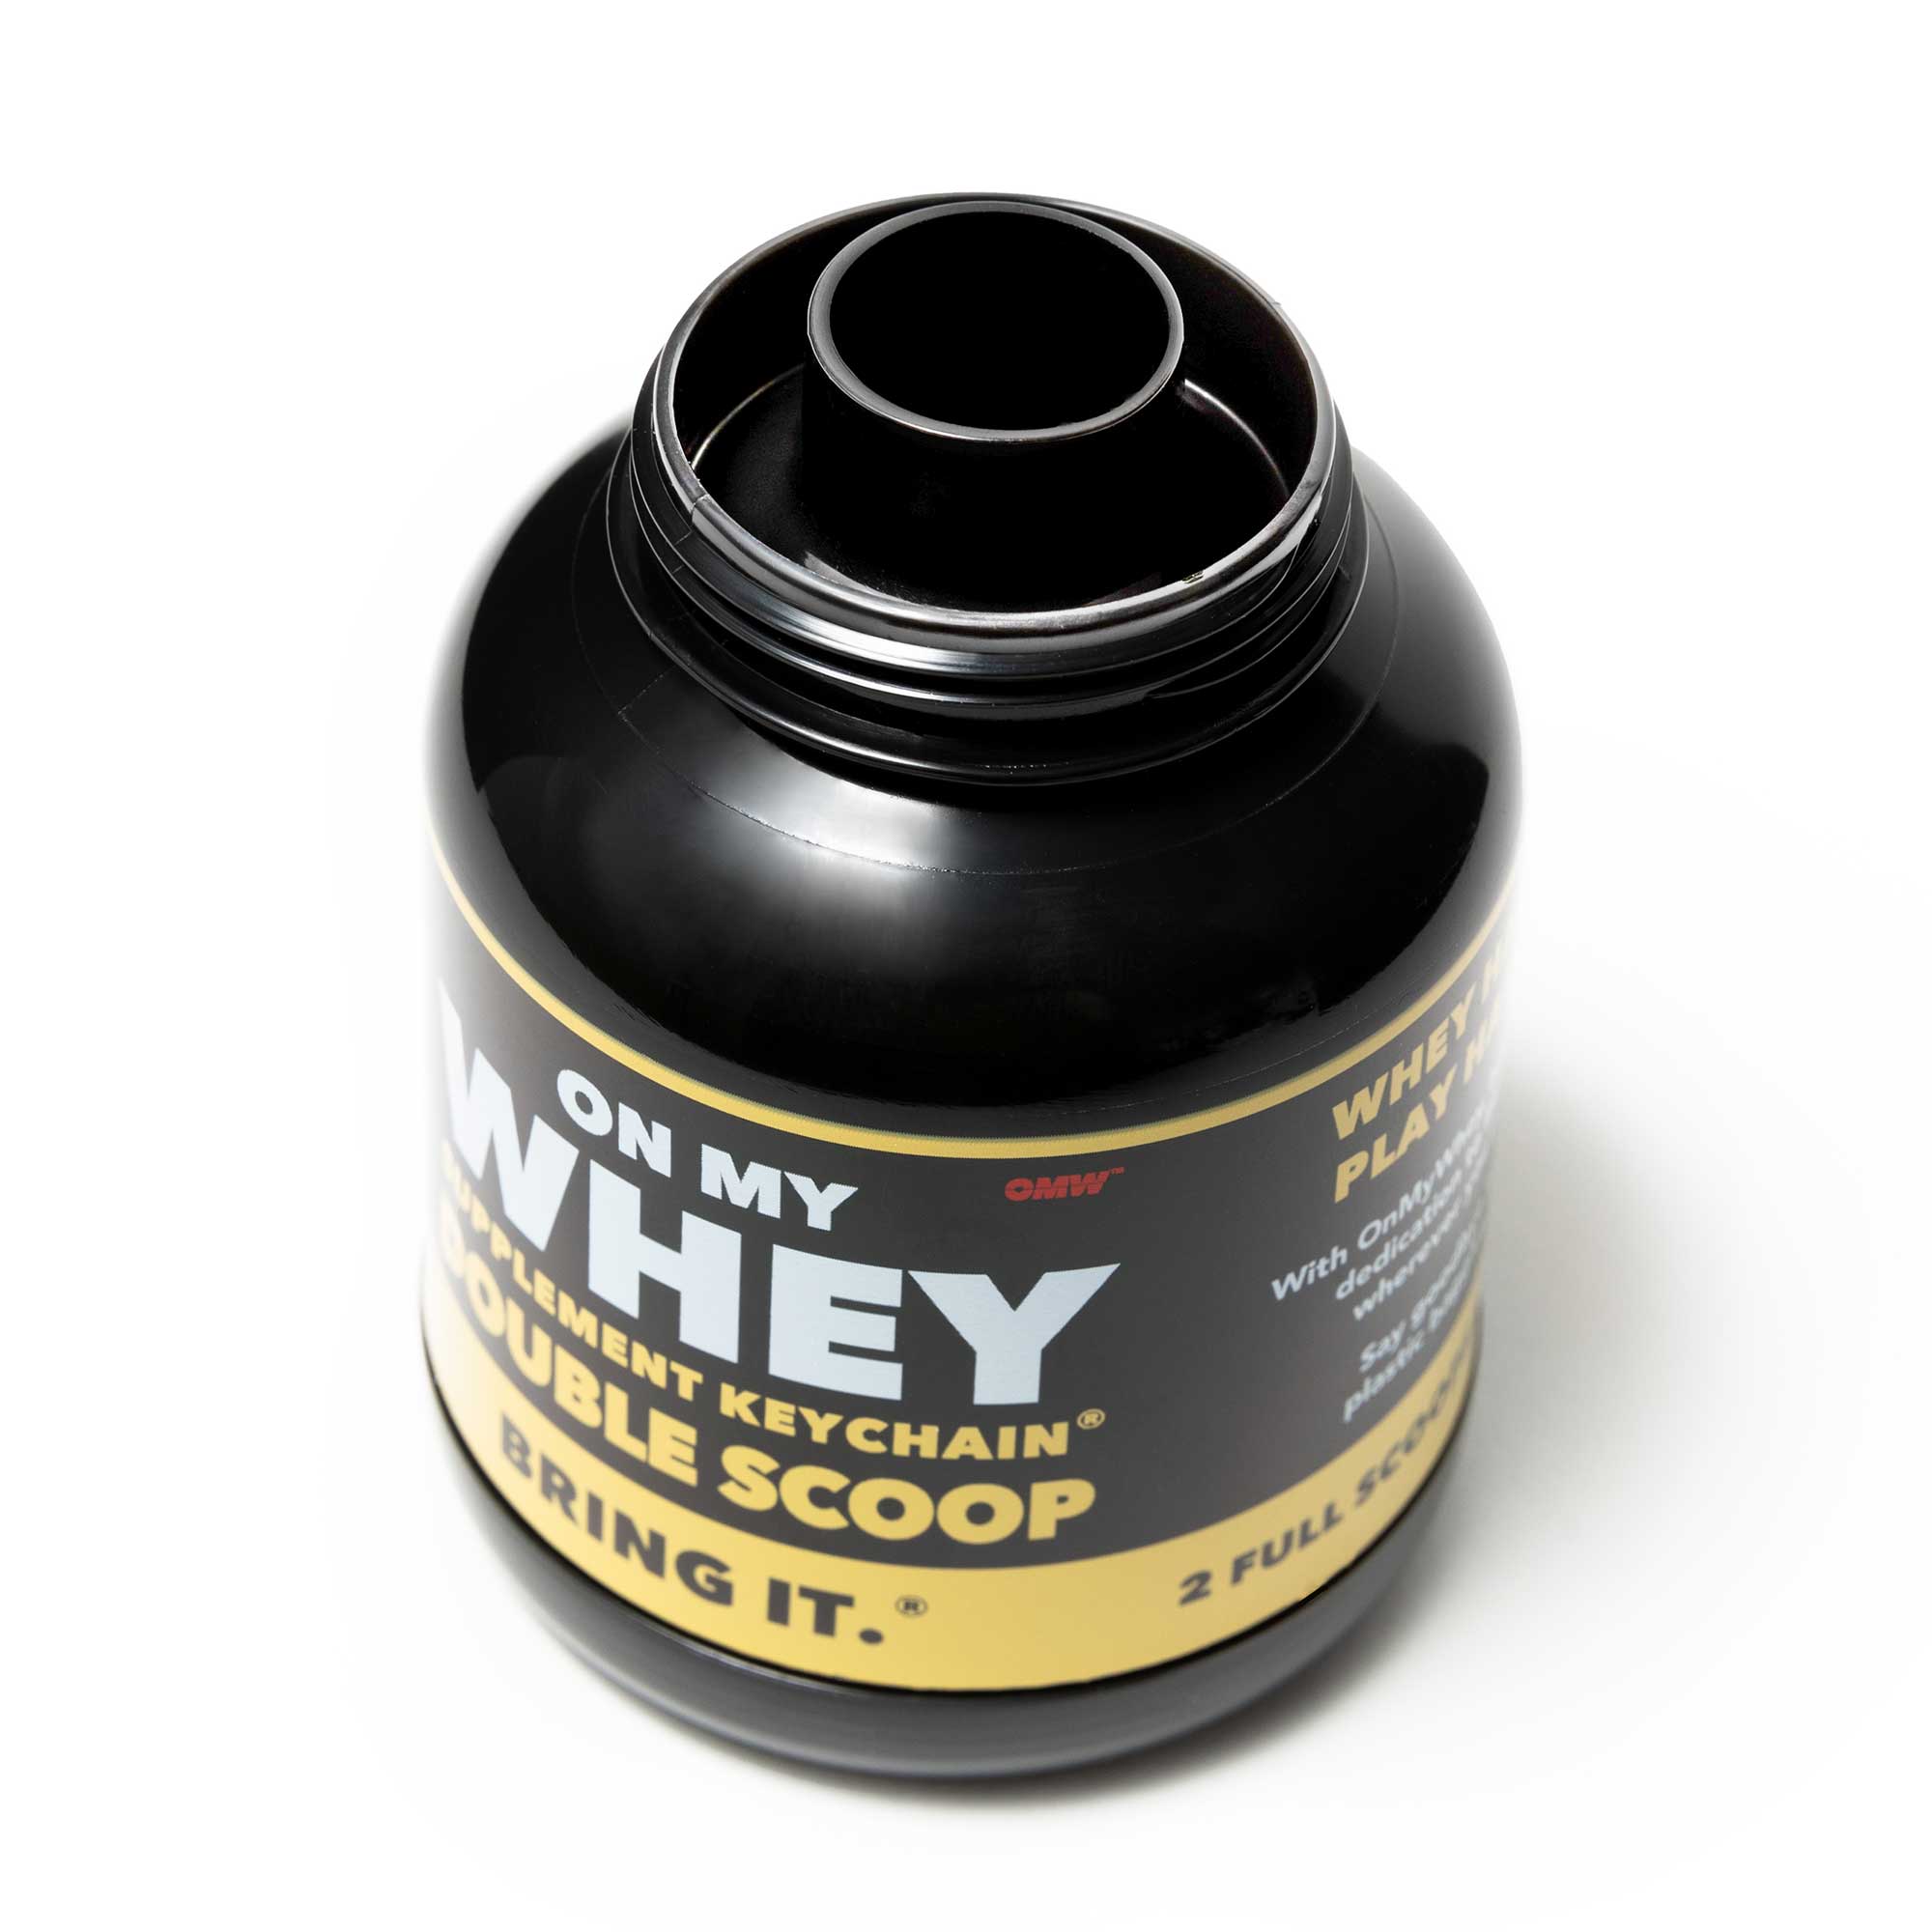 OnMyWhey - Double Scoop (180cc) - Protein Powder and Supplement Funnel  Keychain 3-Pack